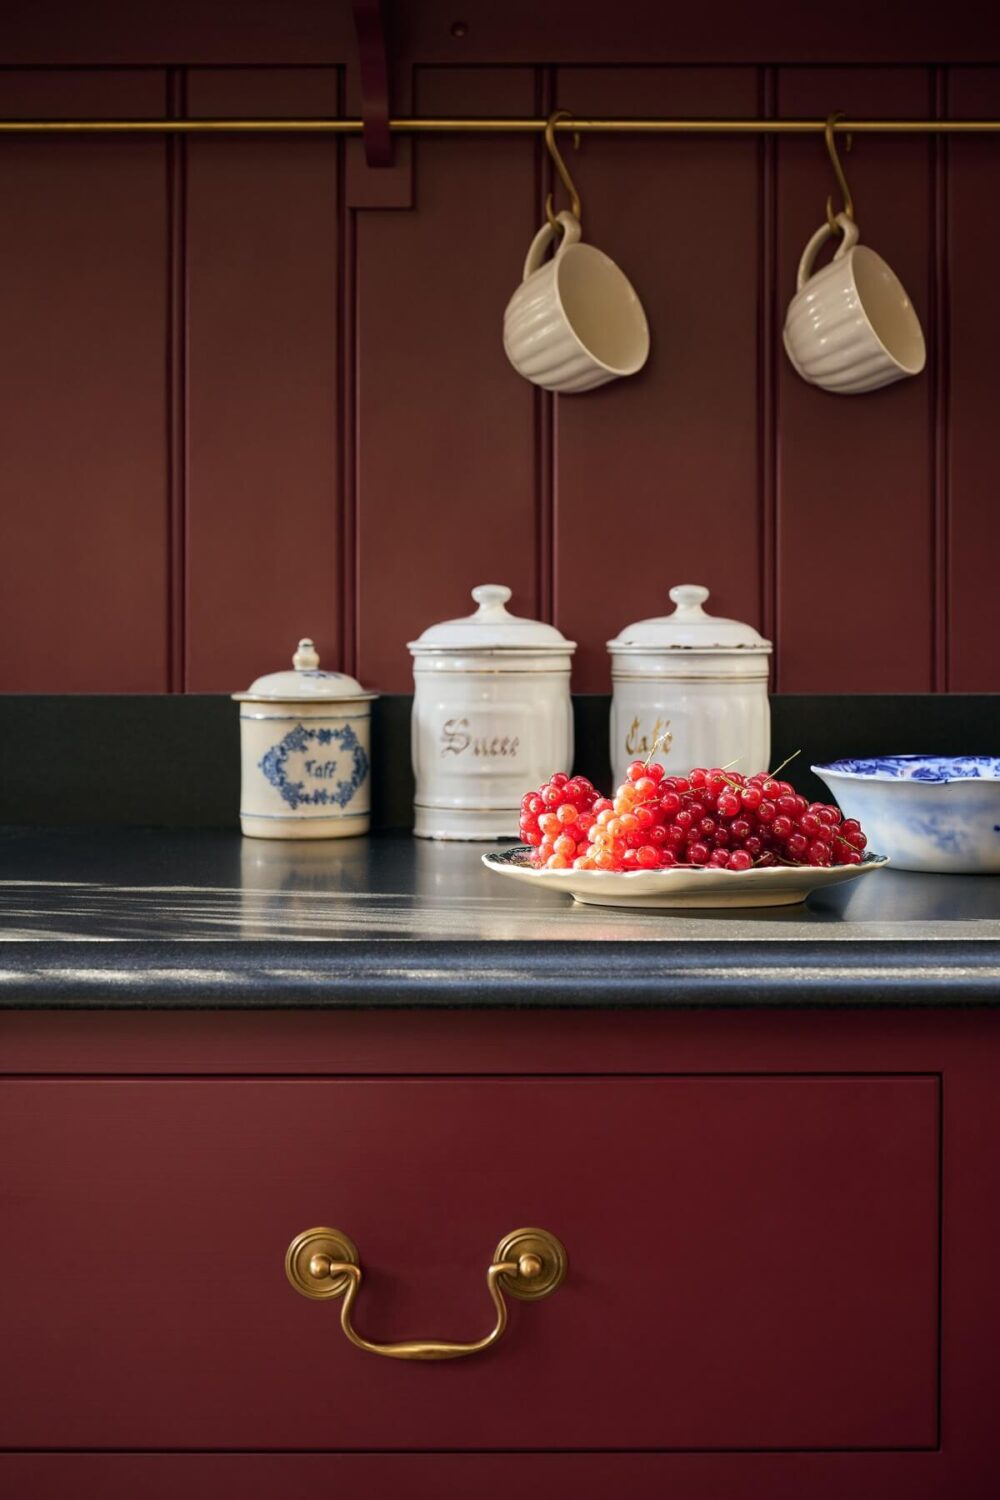 tongue-and-groove-panelling-deep-red-kitchen-devol-nordroom